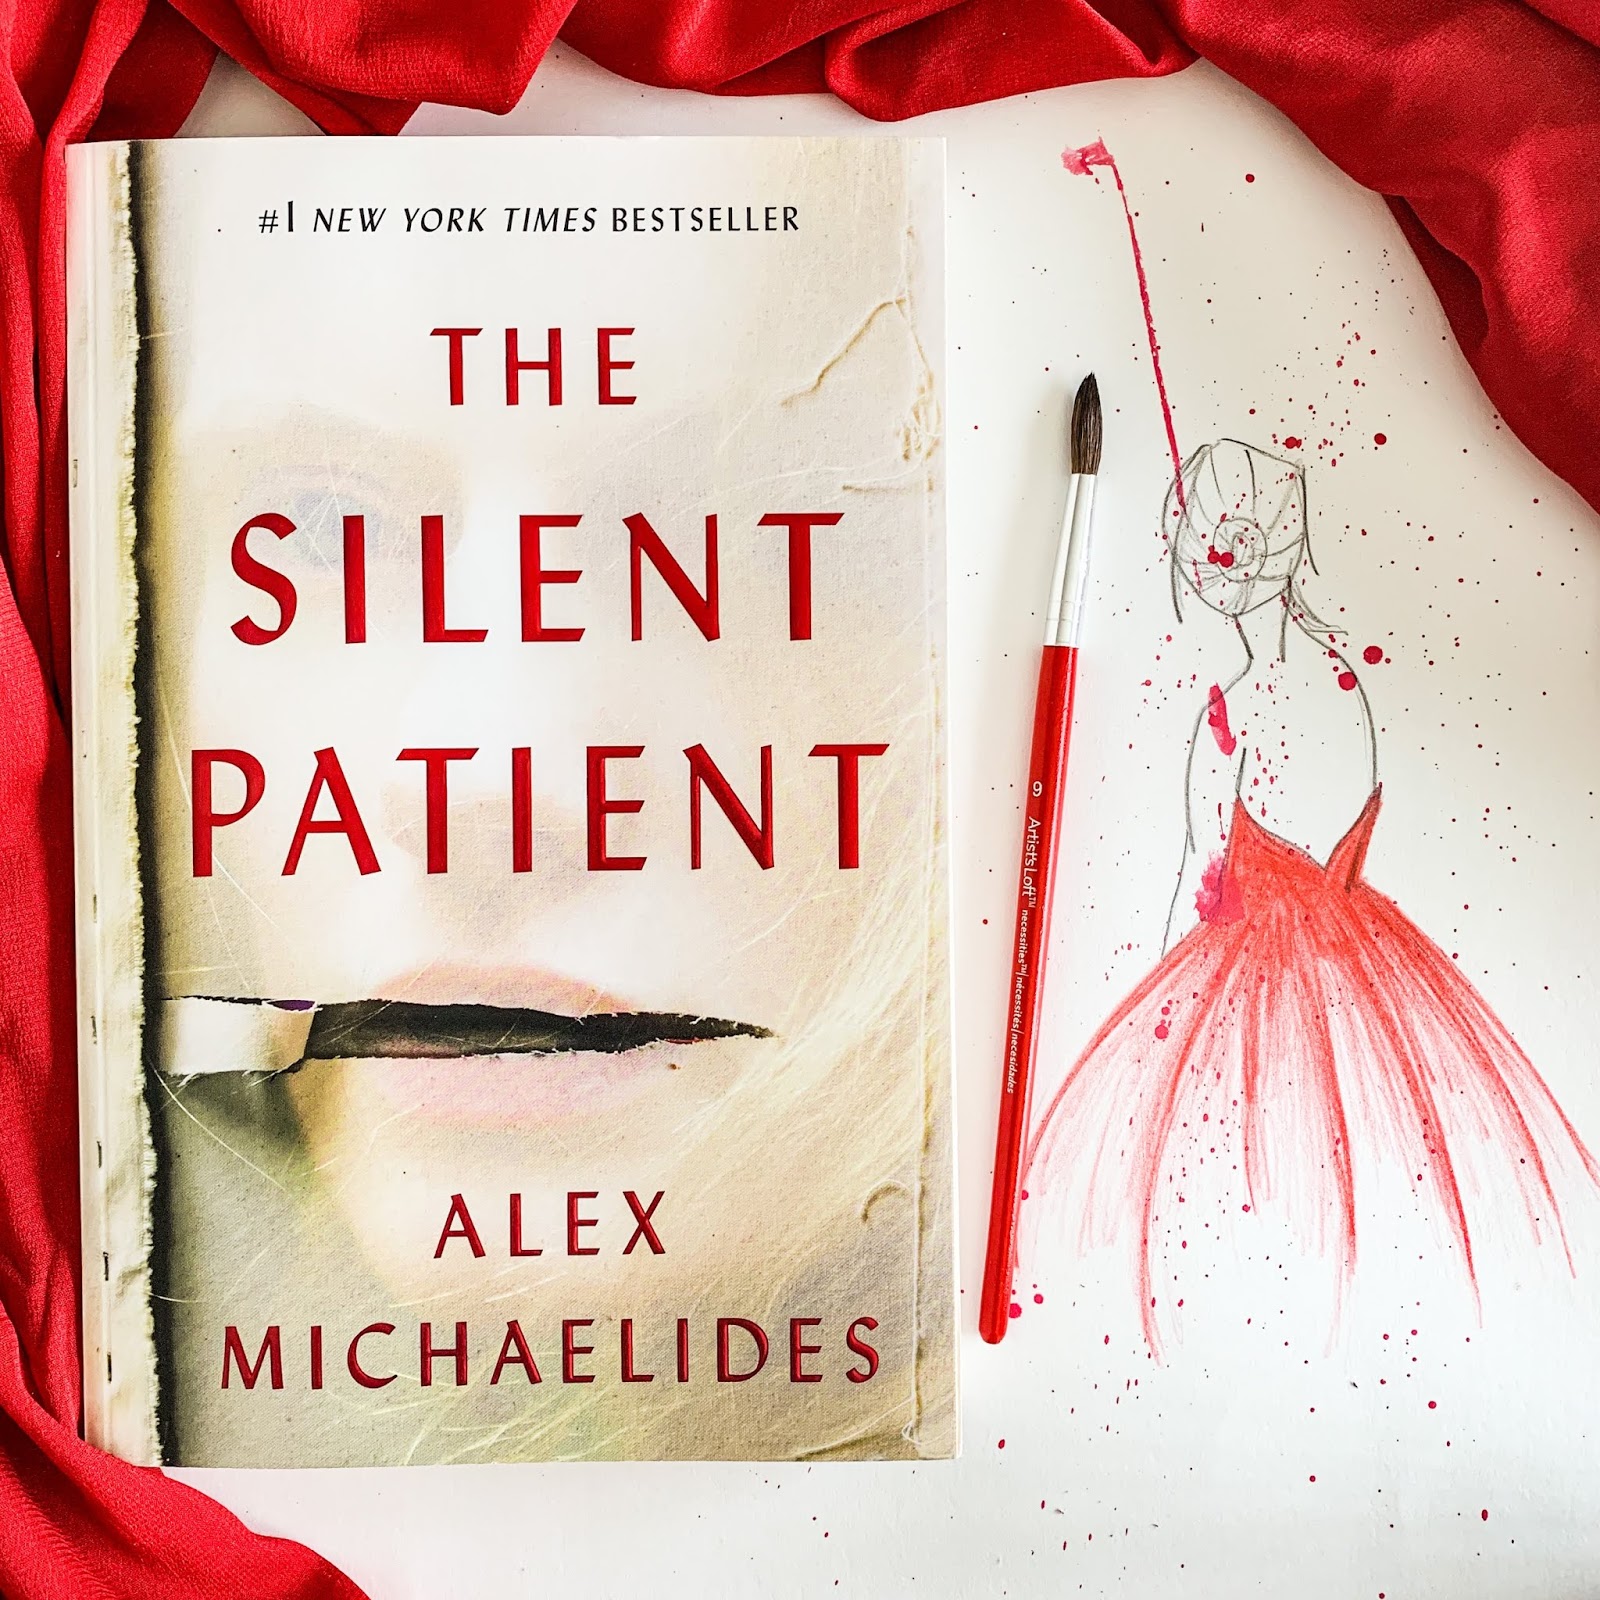 book review on silent patient